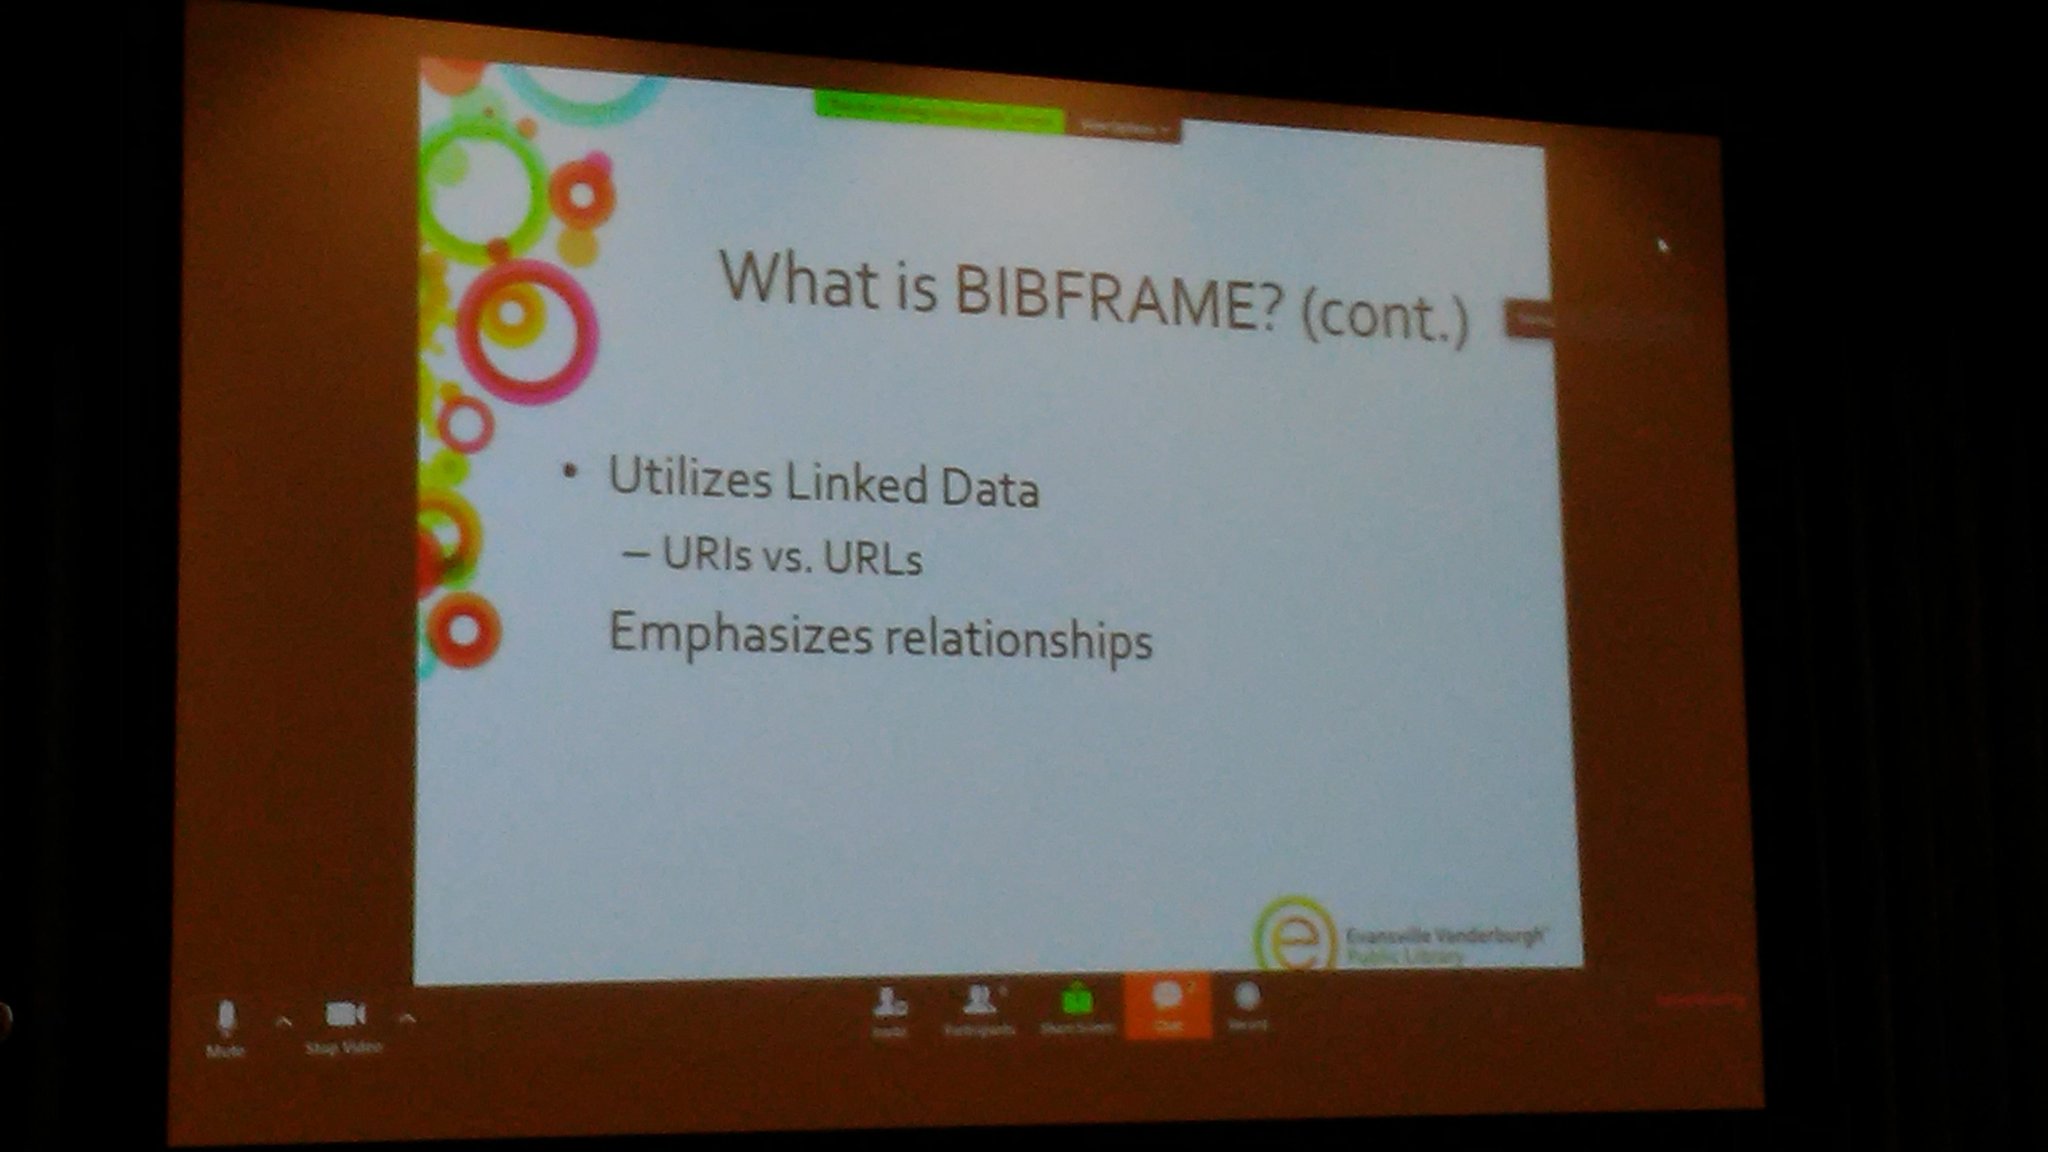 What is BIBFRAME? Still time to register for the MCLS workshop! https://t.co/4mAt7MfwYe #mclschat https://t.co/6ATos1Q76W